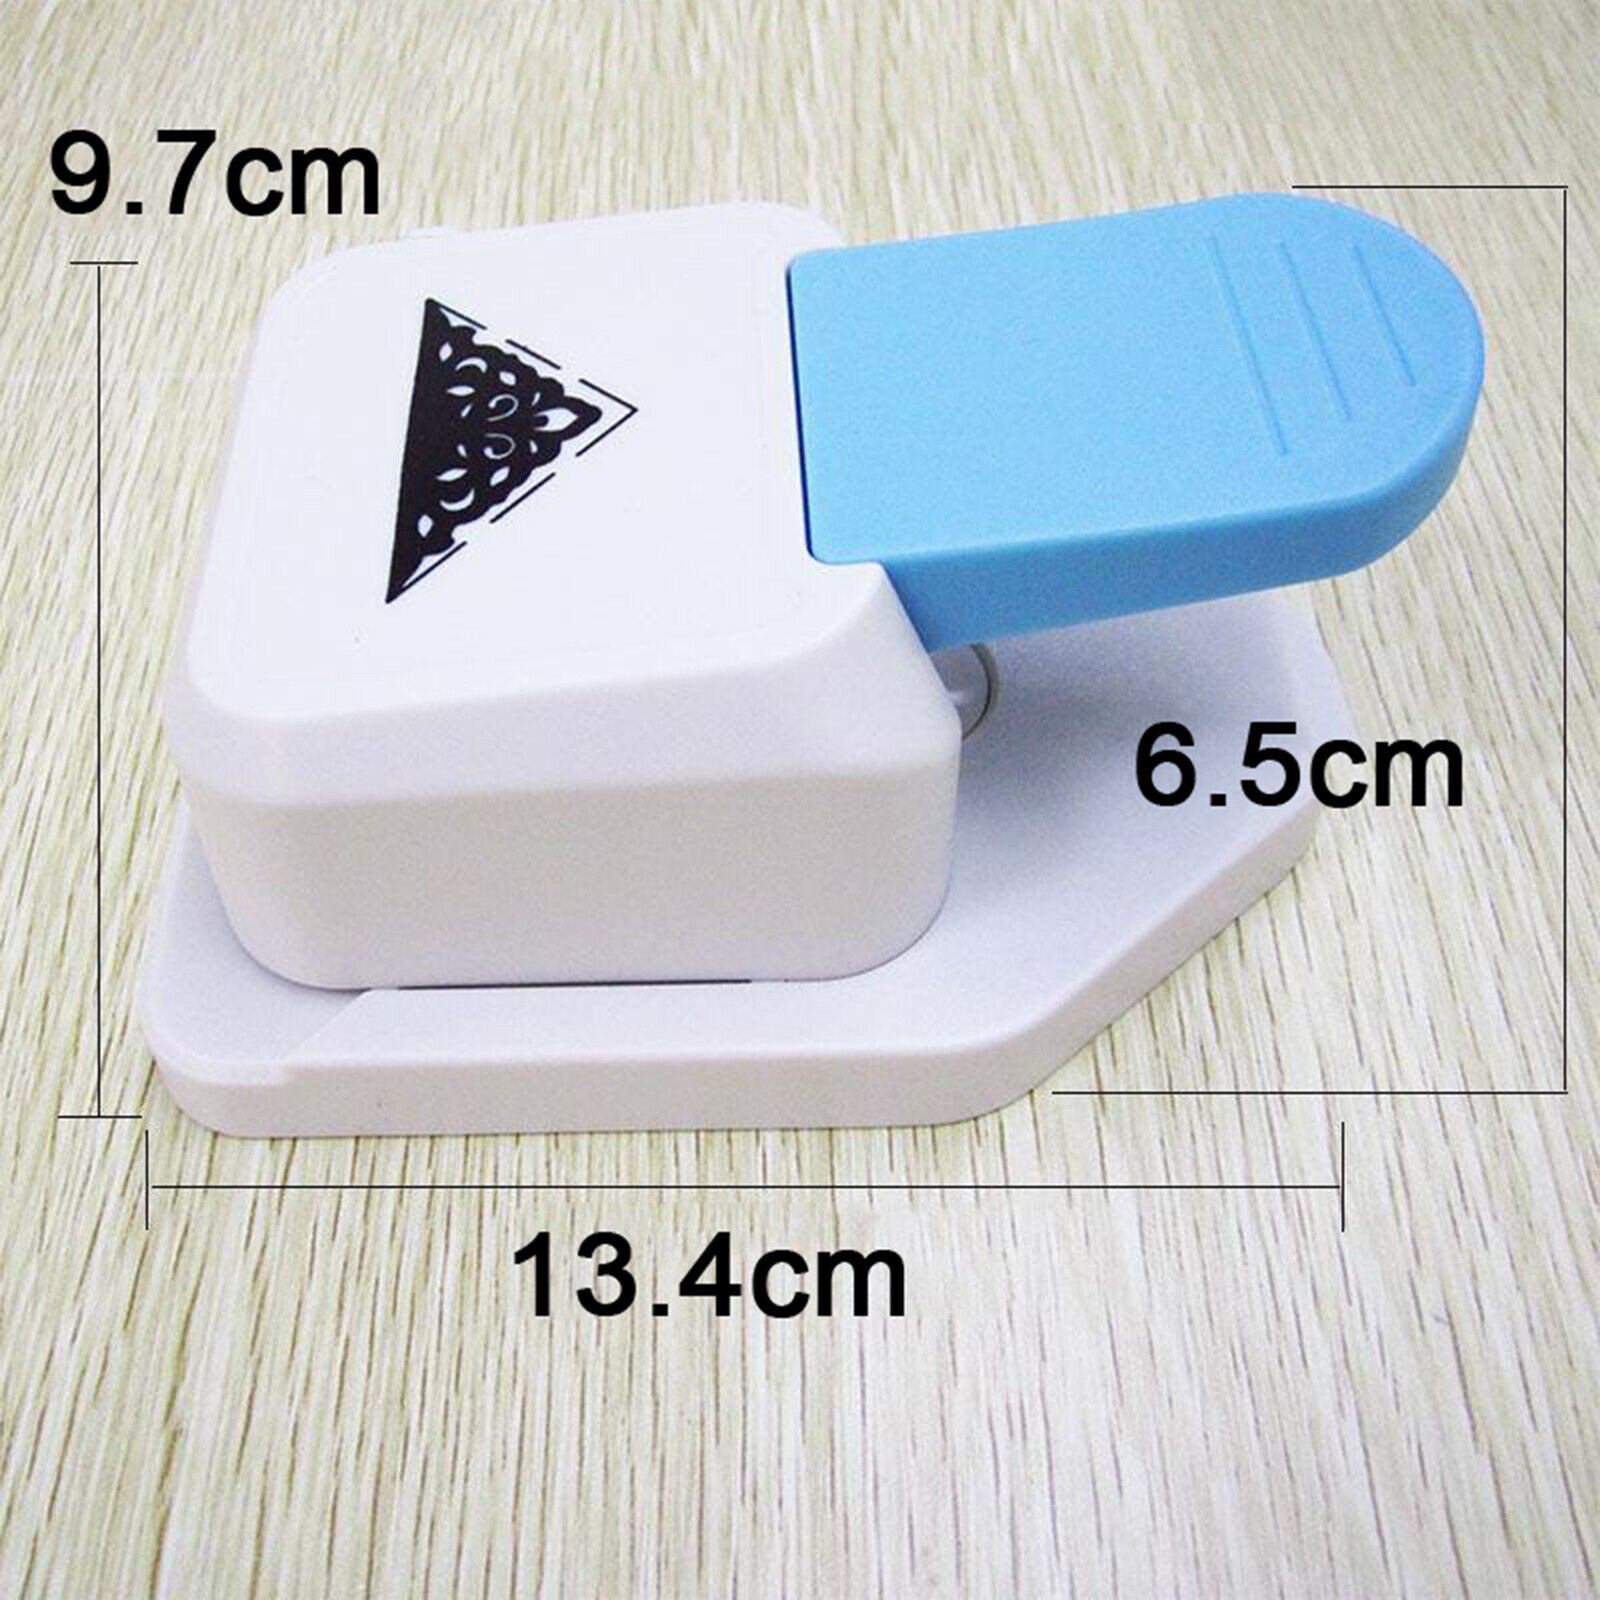 Paper Punch Device Paper Border Cutter Punchers for Hand Account Bookmark